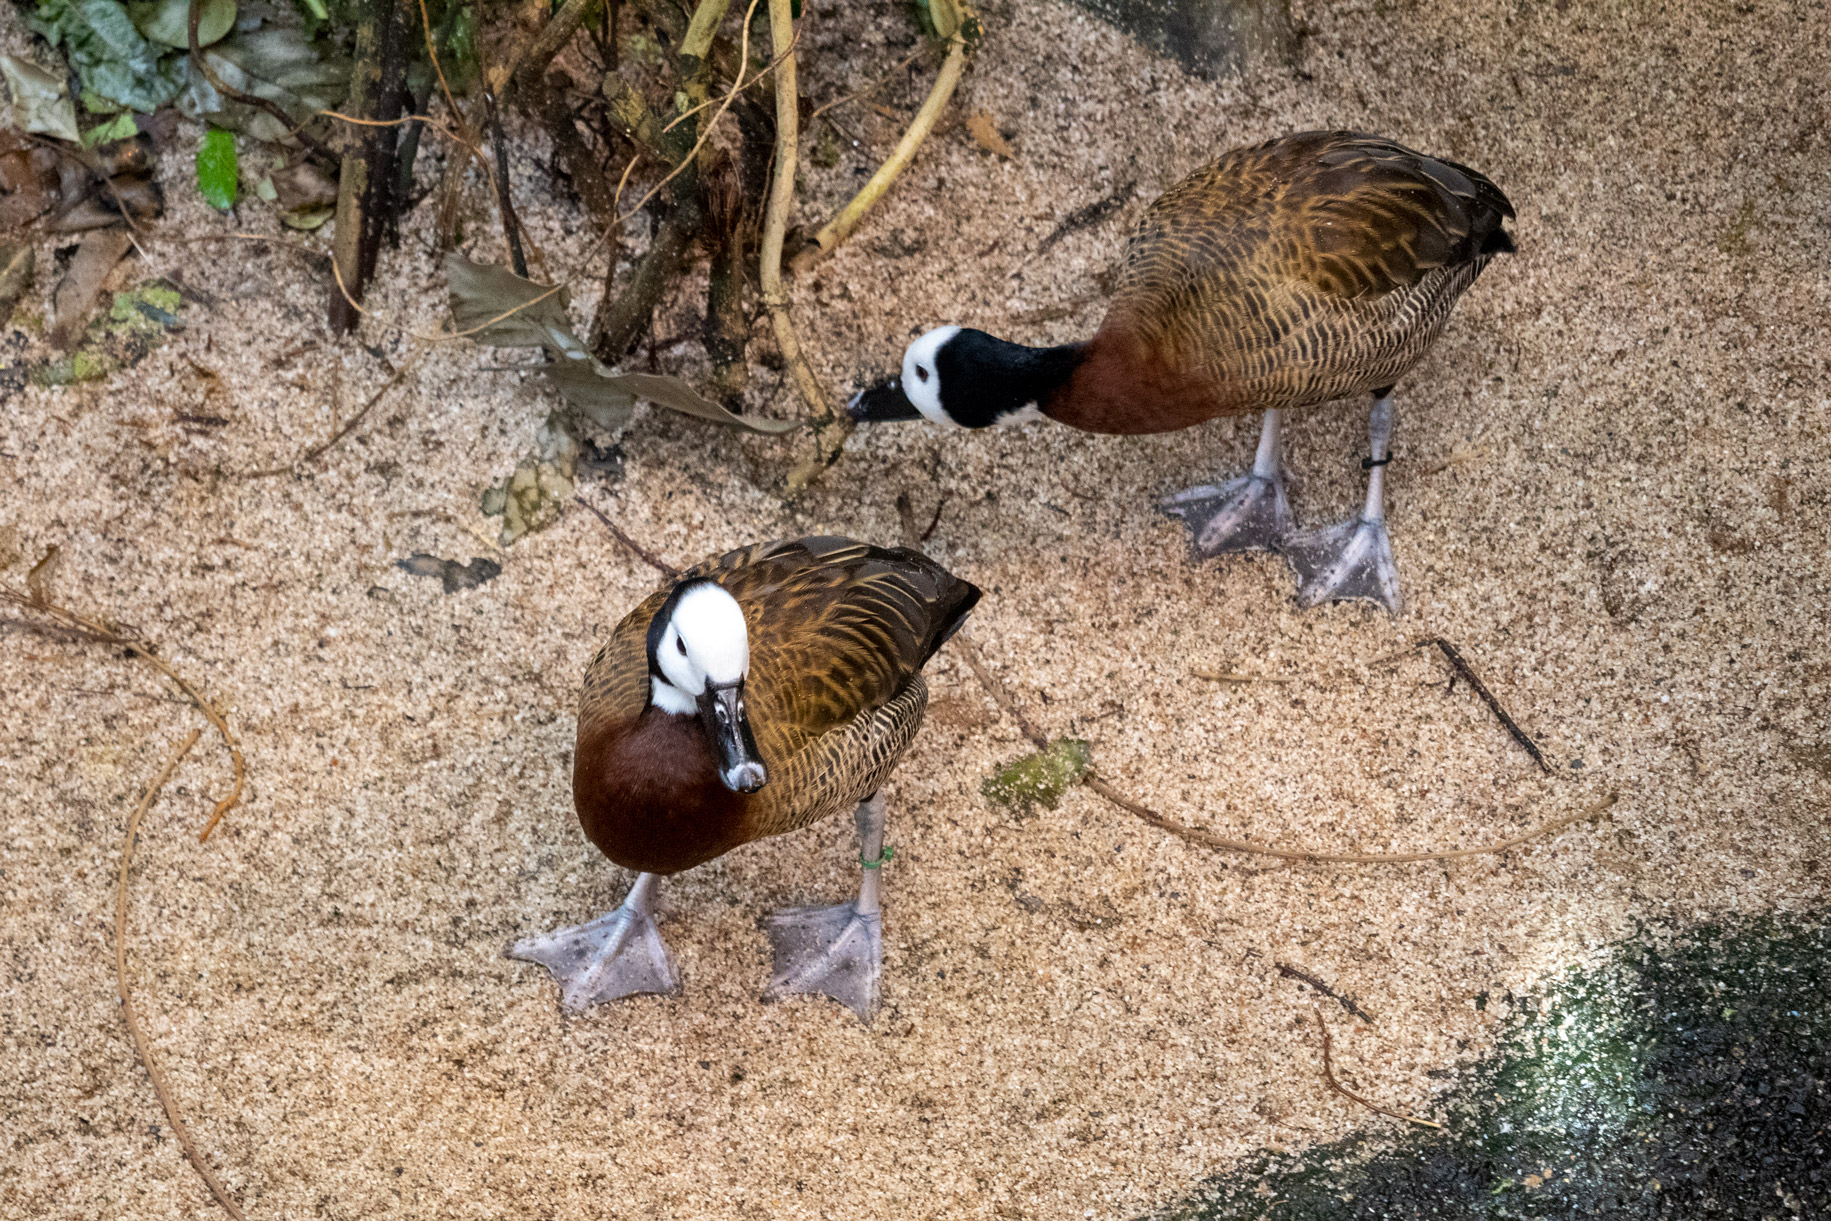 Two brown ducks with white heads and black beaks walking on a sandy beach